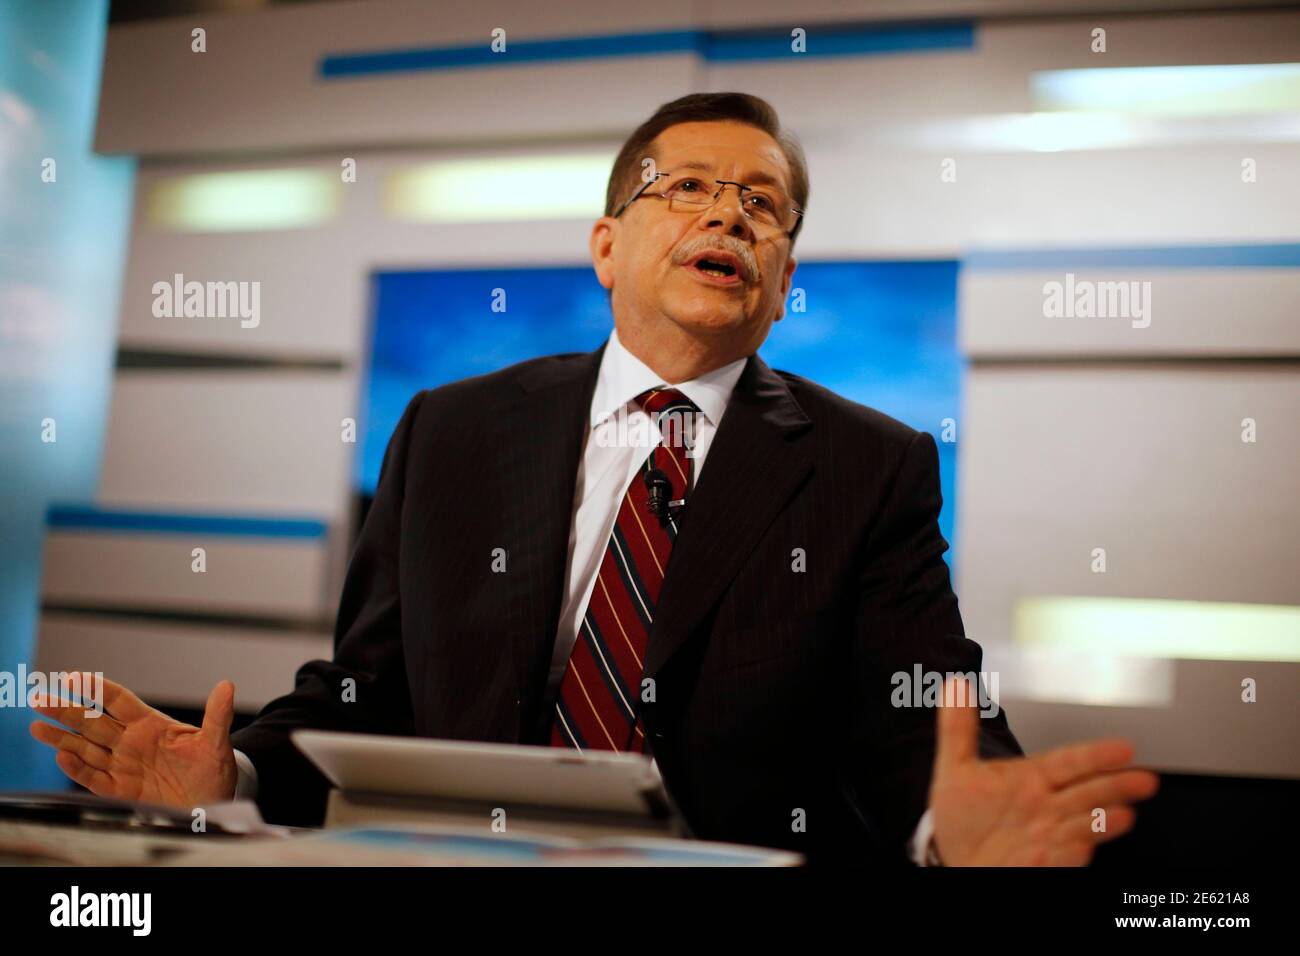 Leopoldo Castillo, anchor and director of TV station Globovision, speaks  during his daily broadcast 'Alo Ciudadano' (Hello Citizen) in Caracas May  28, 2013. A flagship Venezuelan TV channel known for its militant